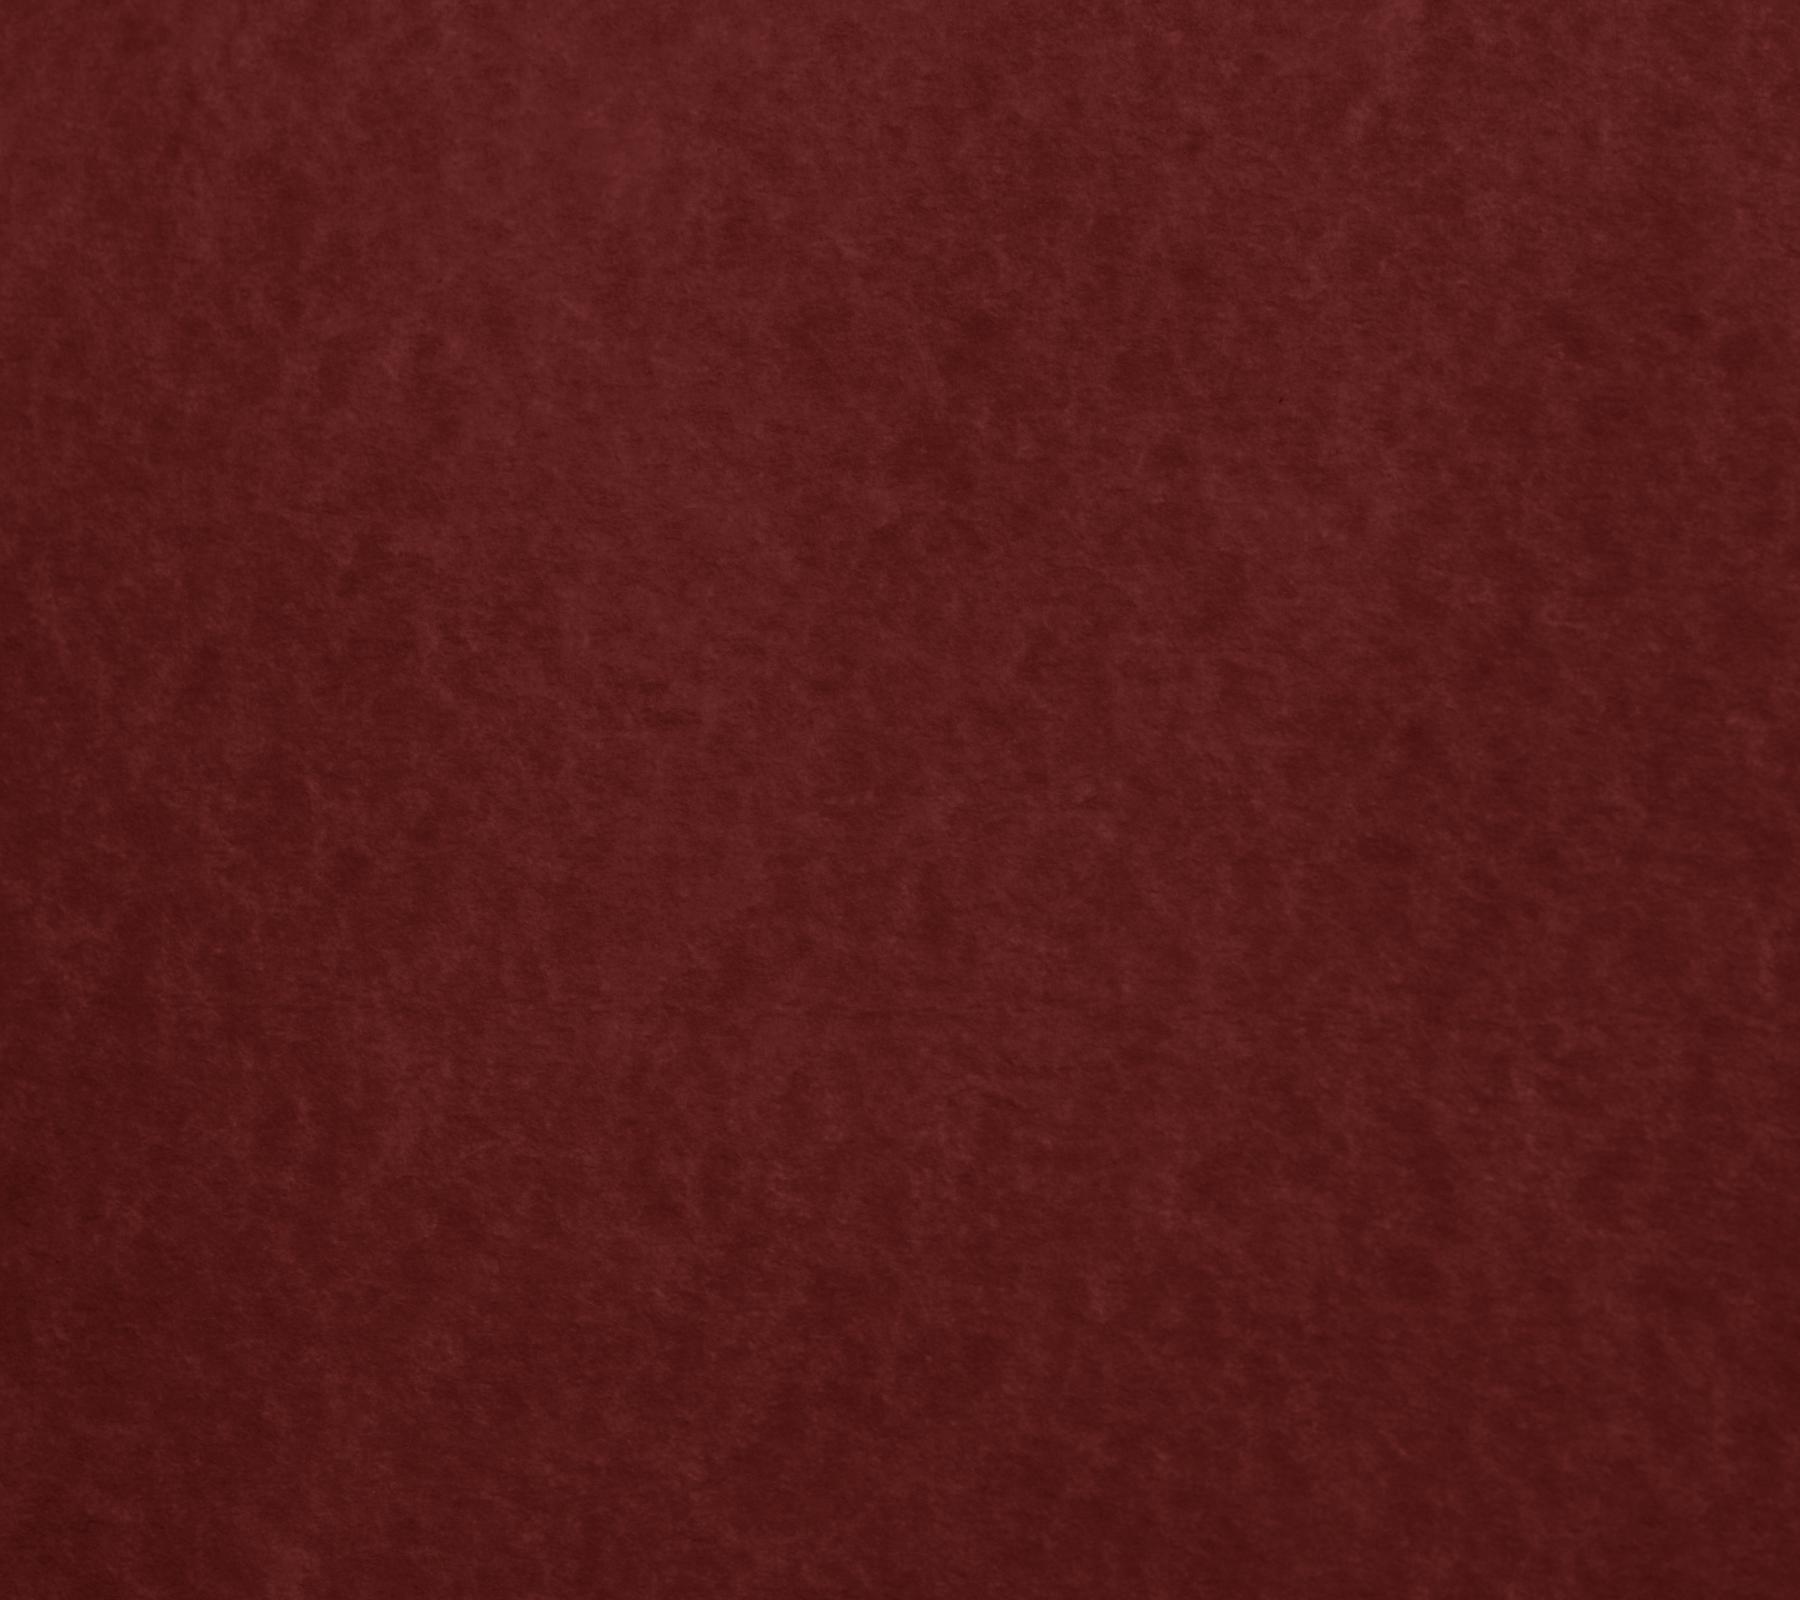 Maroon Parchment Paper Background 1800x1600 Background Image